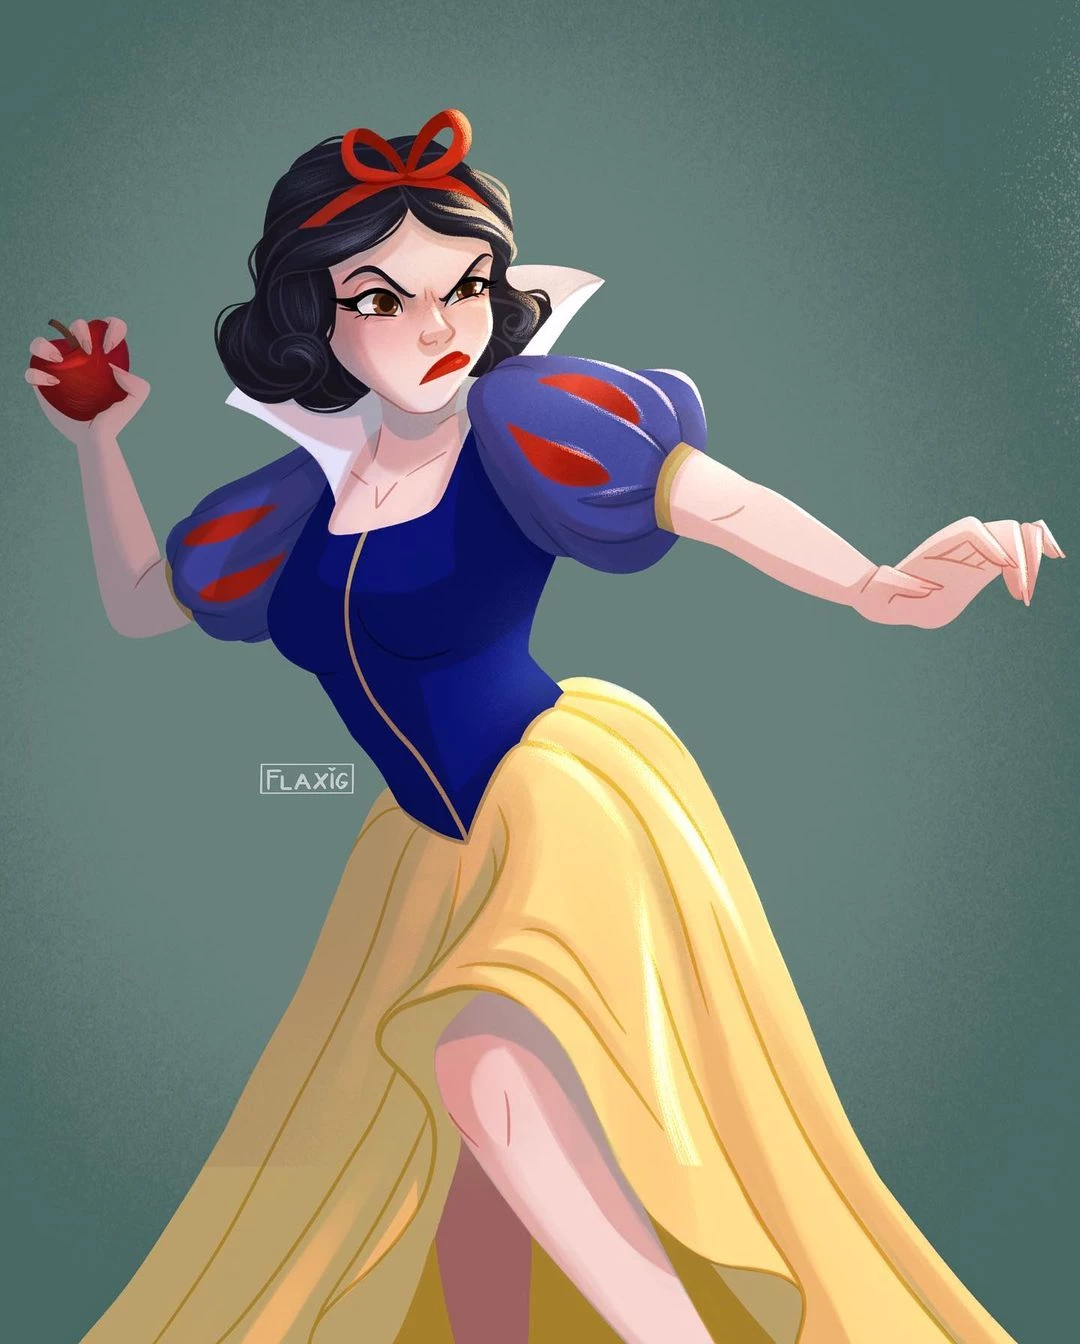 I’m Pretty Sure This Scene Isn’t In The Original Movie, But It Looks Fun Nonetheless (Snow White And The Seven Dwarfs)